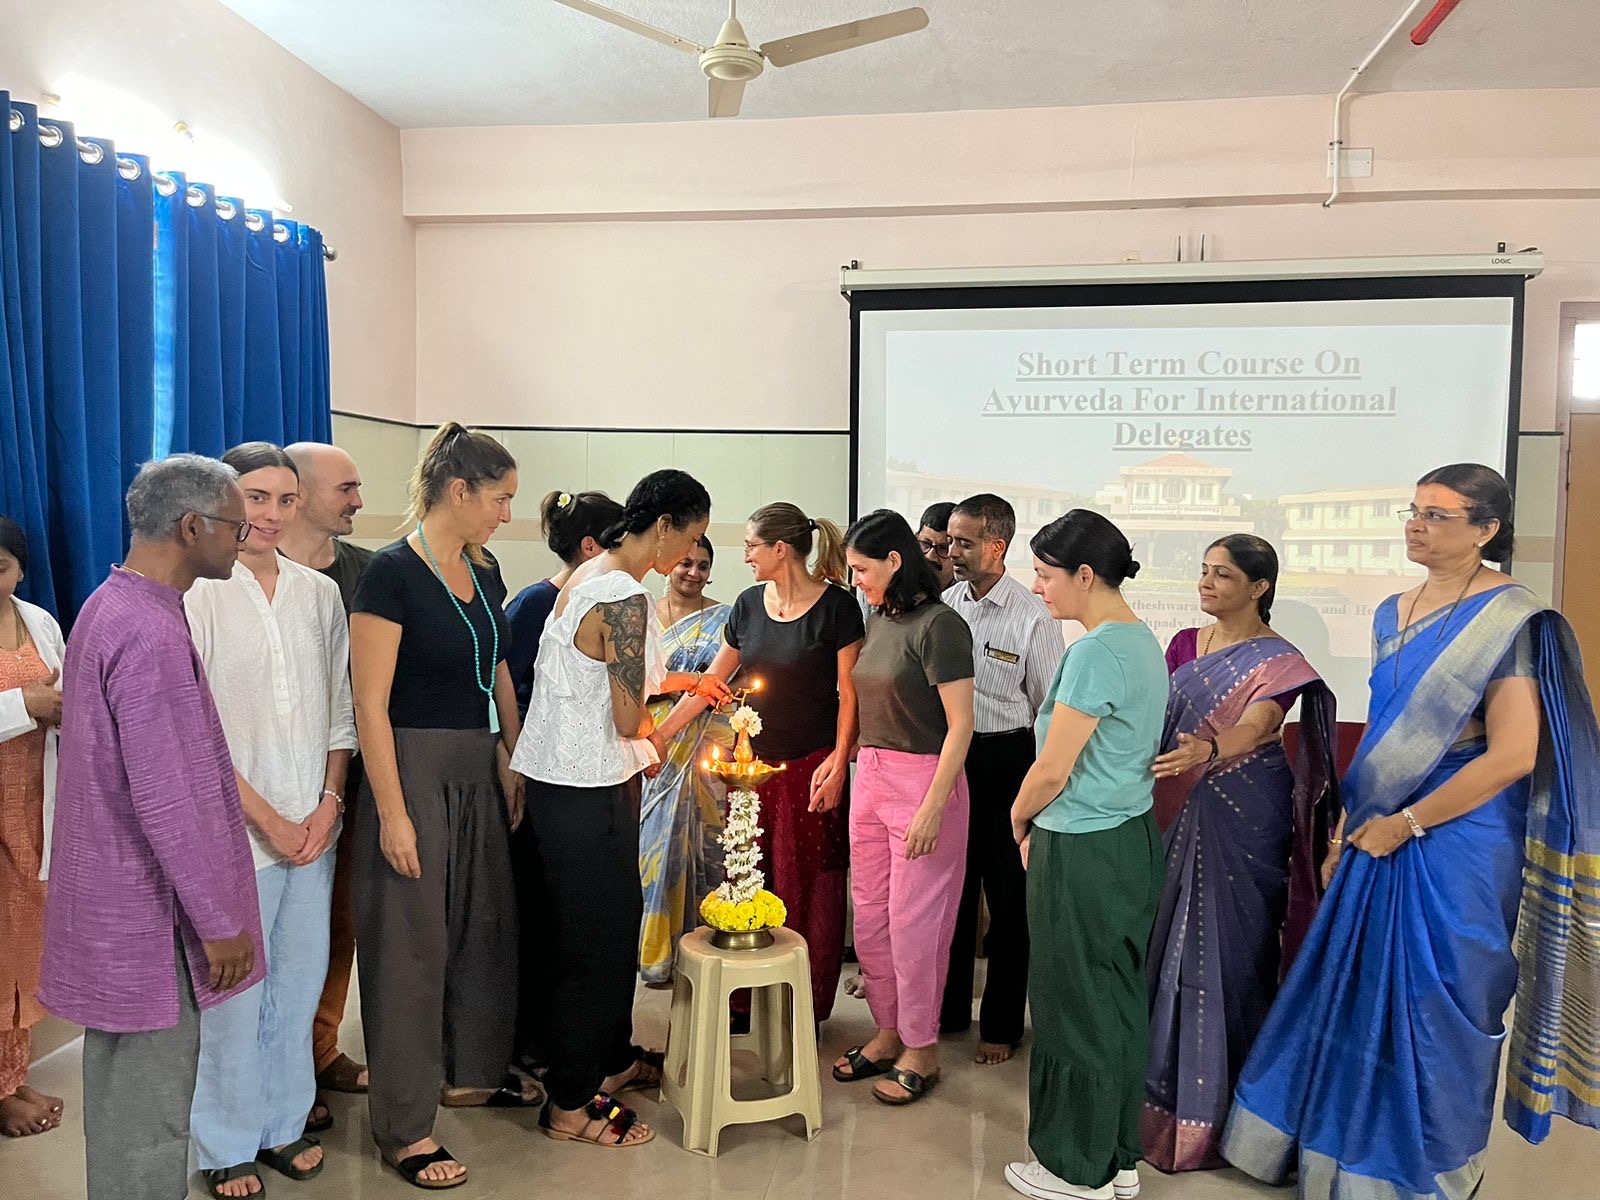 INAUGURAL CEREMONY OF THE SHORT-TERM COURSE ON AYURVEDA FOR THE INTERNATIONAL DELEGATES